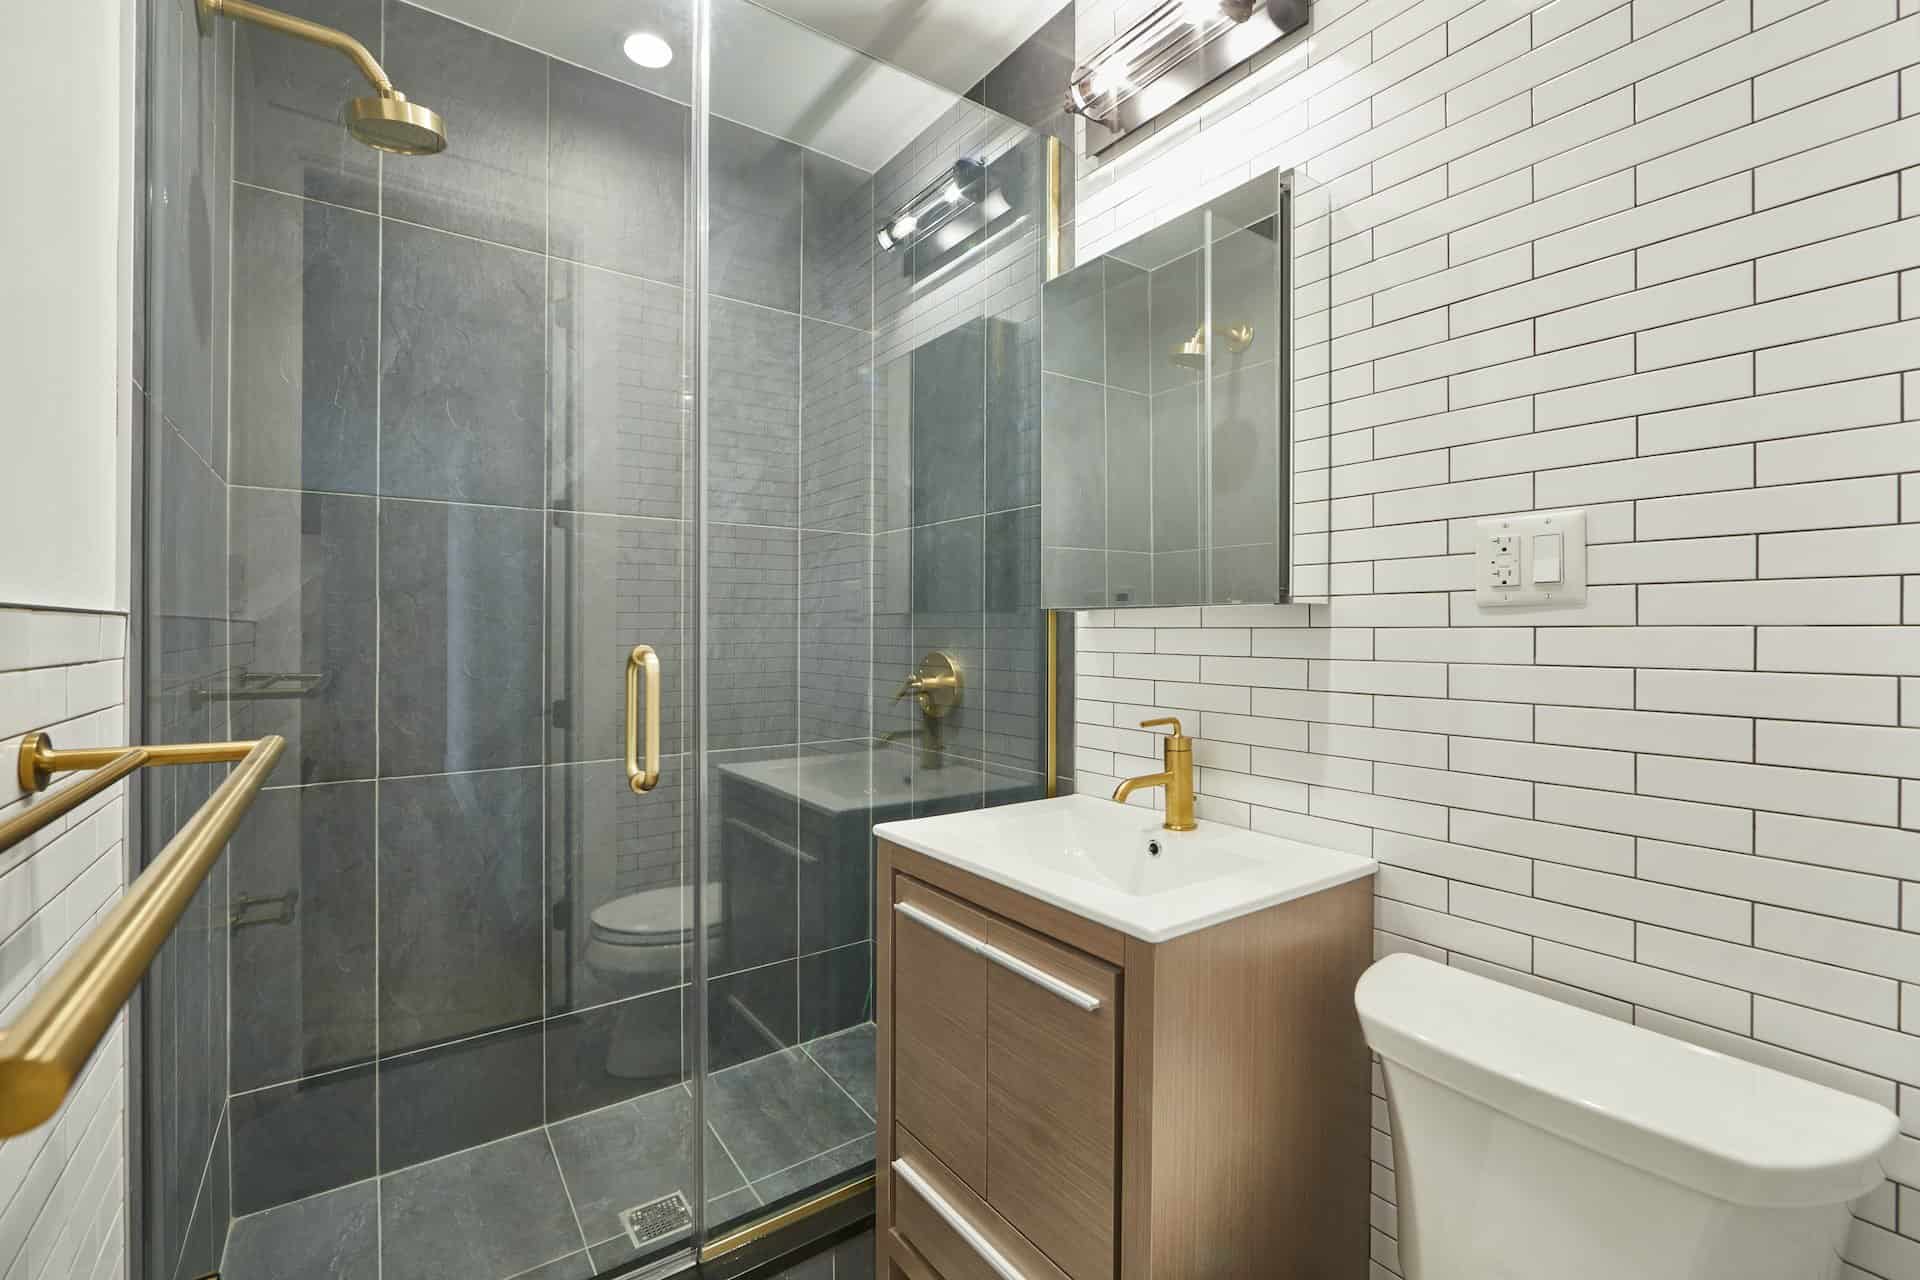 Bathroom at 207 East 33rd Street apartments with tile walls, single vanity, a square mirror cabinet and walk-in shower.